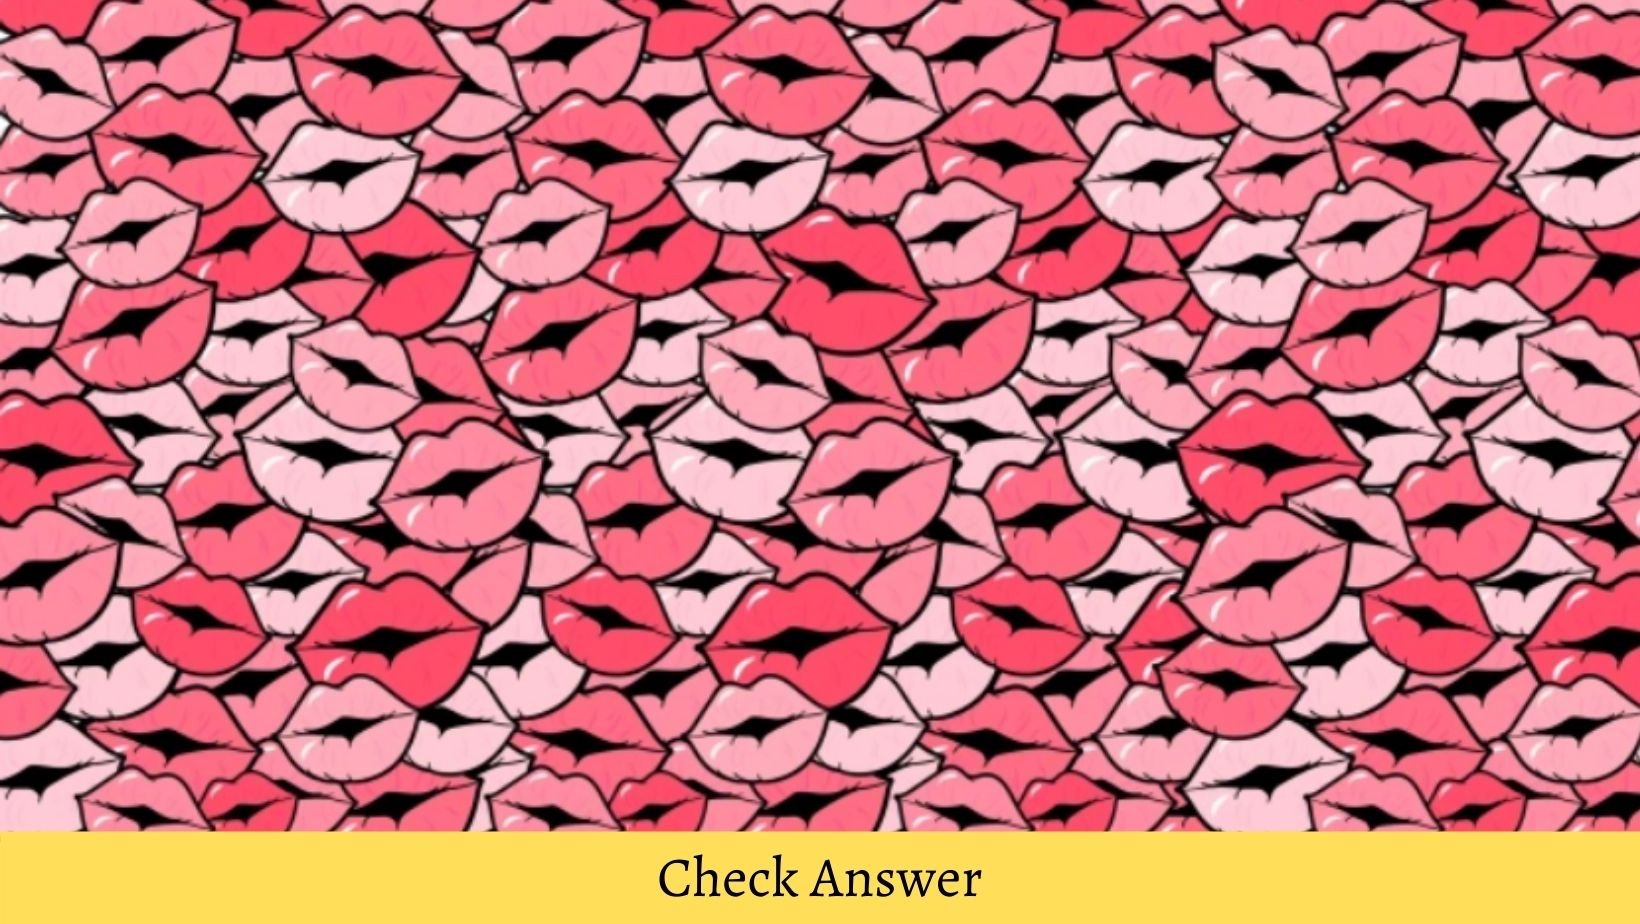 small joys thumbnail 9 1.jpg?resize=412,232 - There's A Lipstick Hiding In This Photo, Can You Find It In Less Than A Minute?